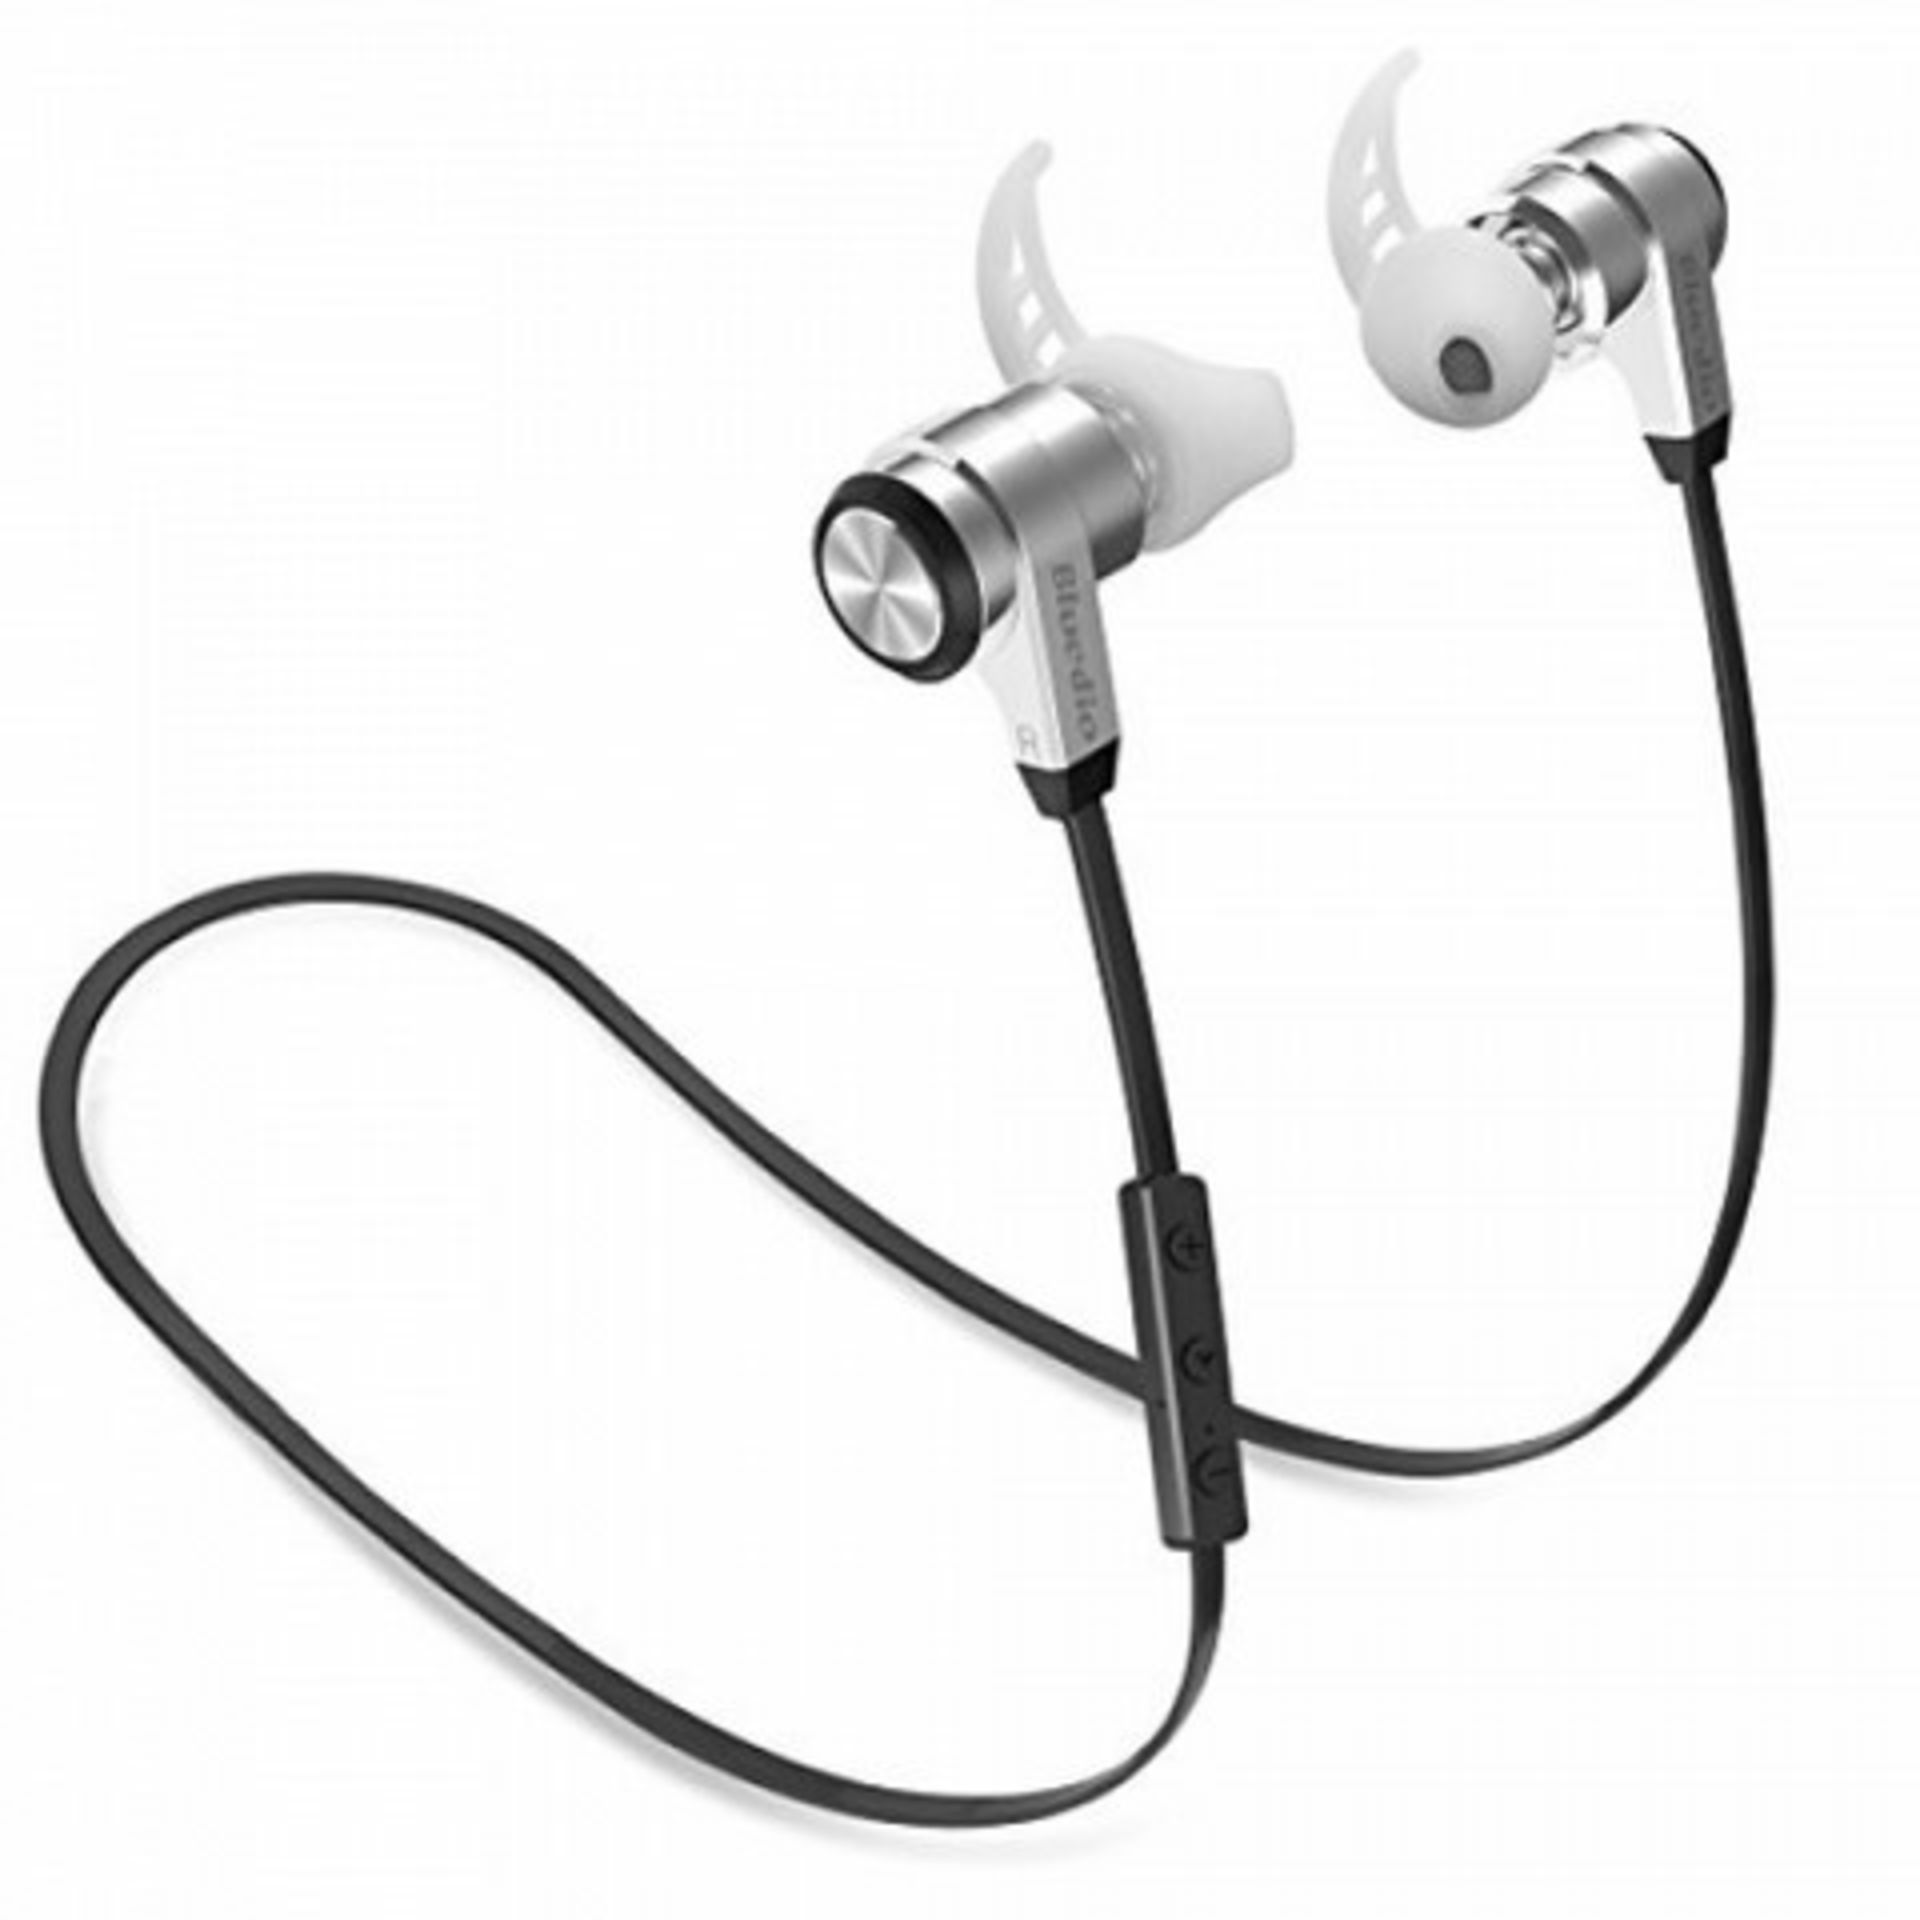 V Brand New Pair of Bluetooth Earphones/Headset (All Boxed) - Colours and Styles/Makes May Vary - - Image 4 of 7